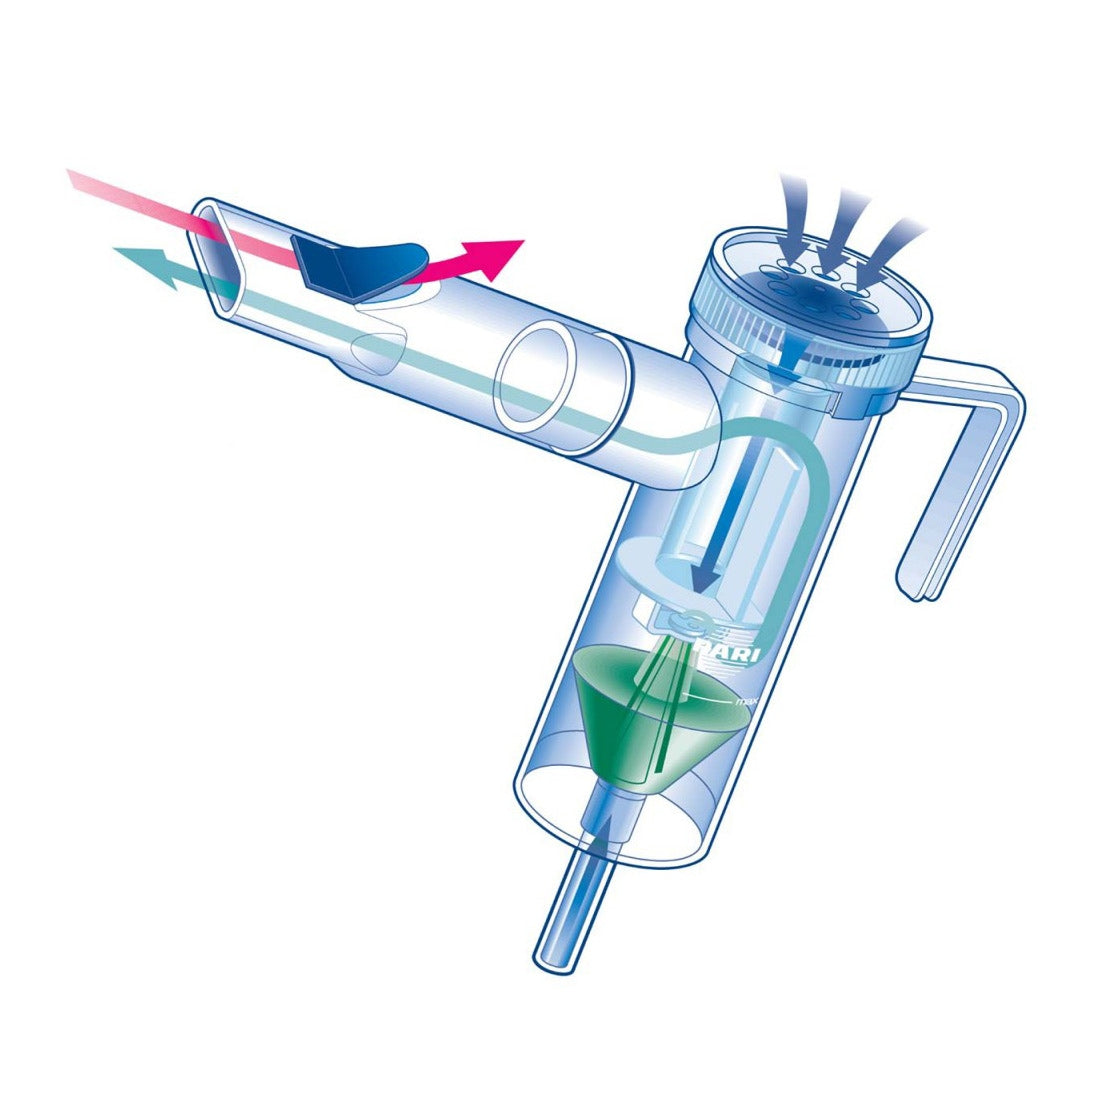 Diagram of the reusable nebulizer